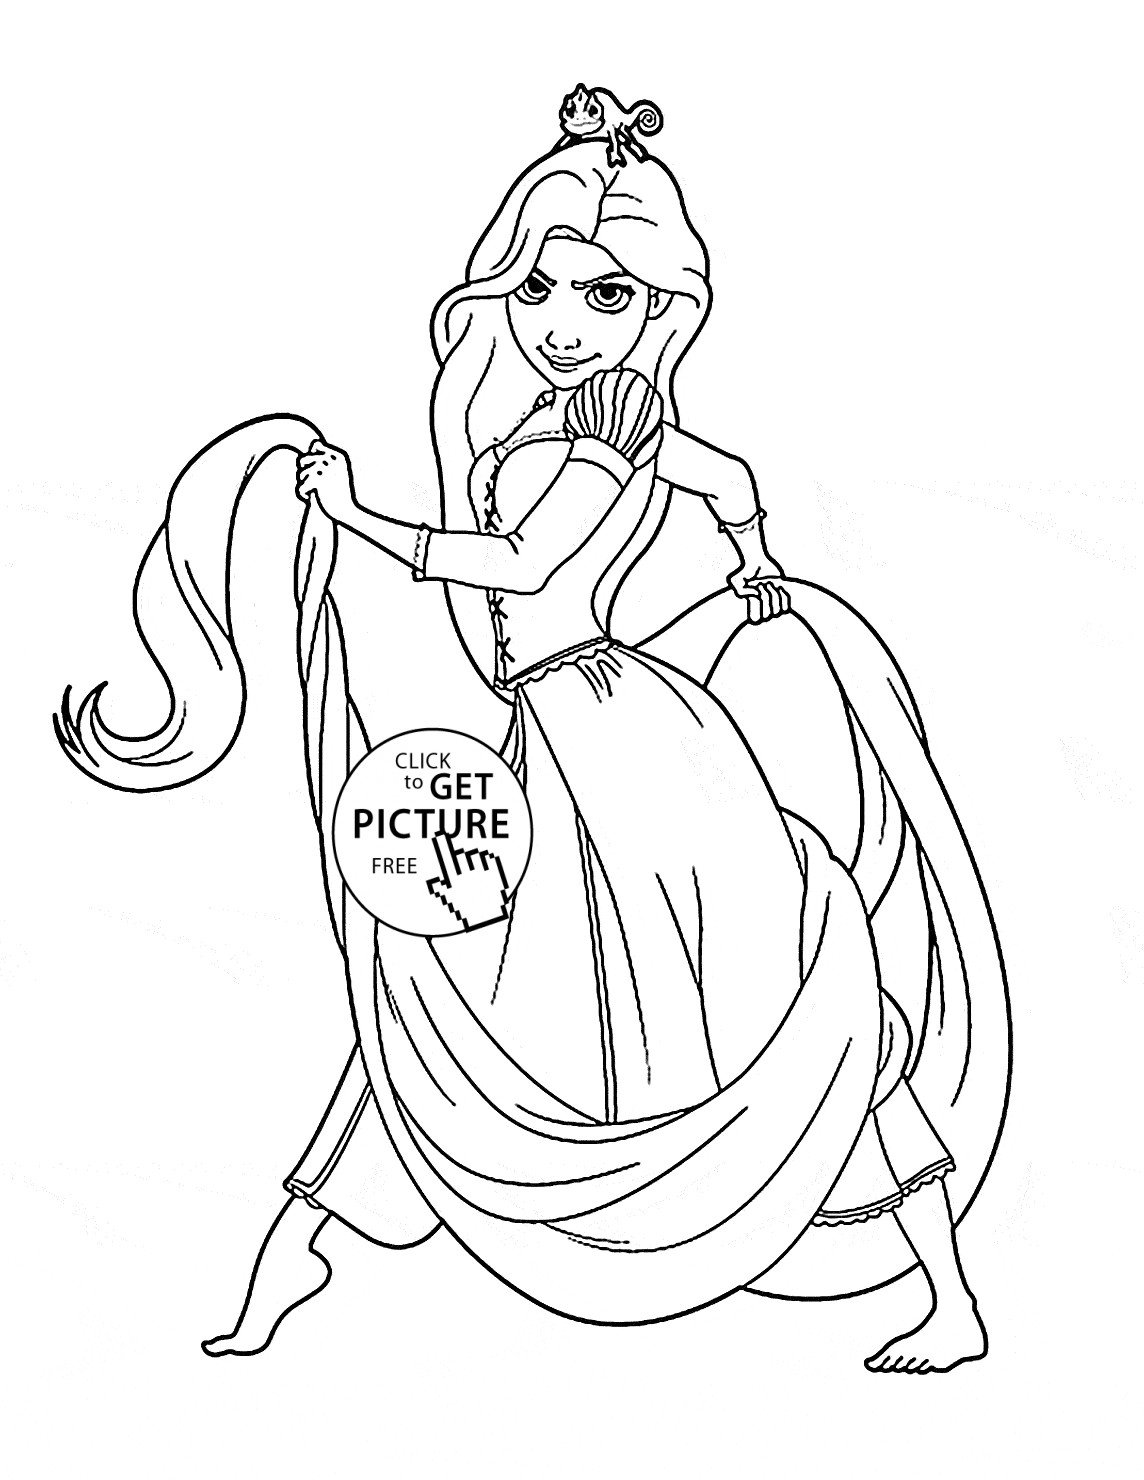 Coloring Pages For Girls Princess
 Serious Princess Rapunzel coloring page for kids disney